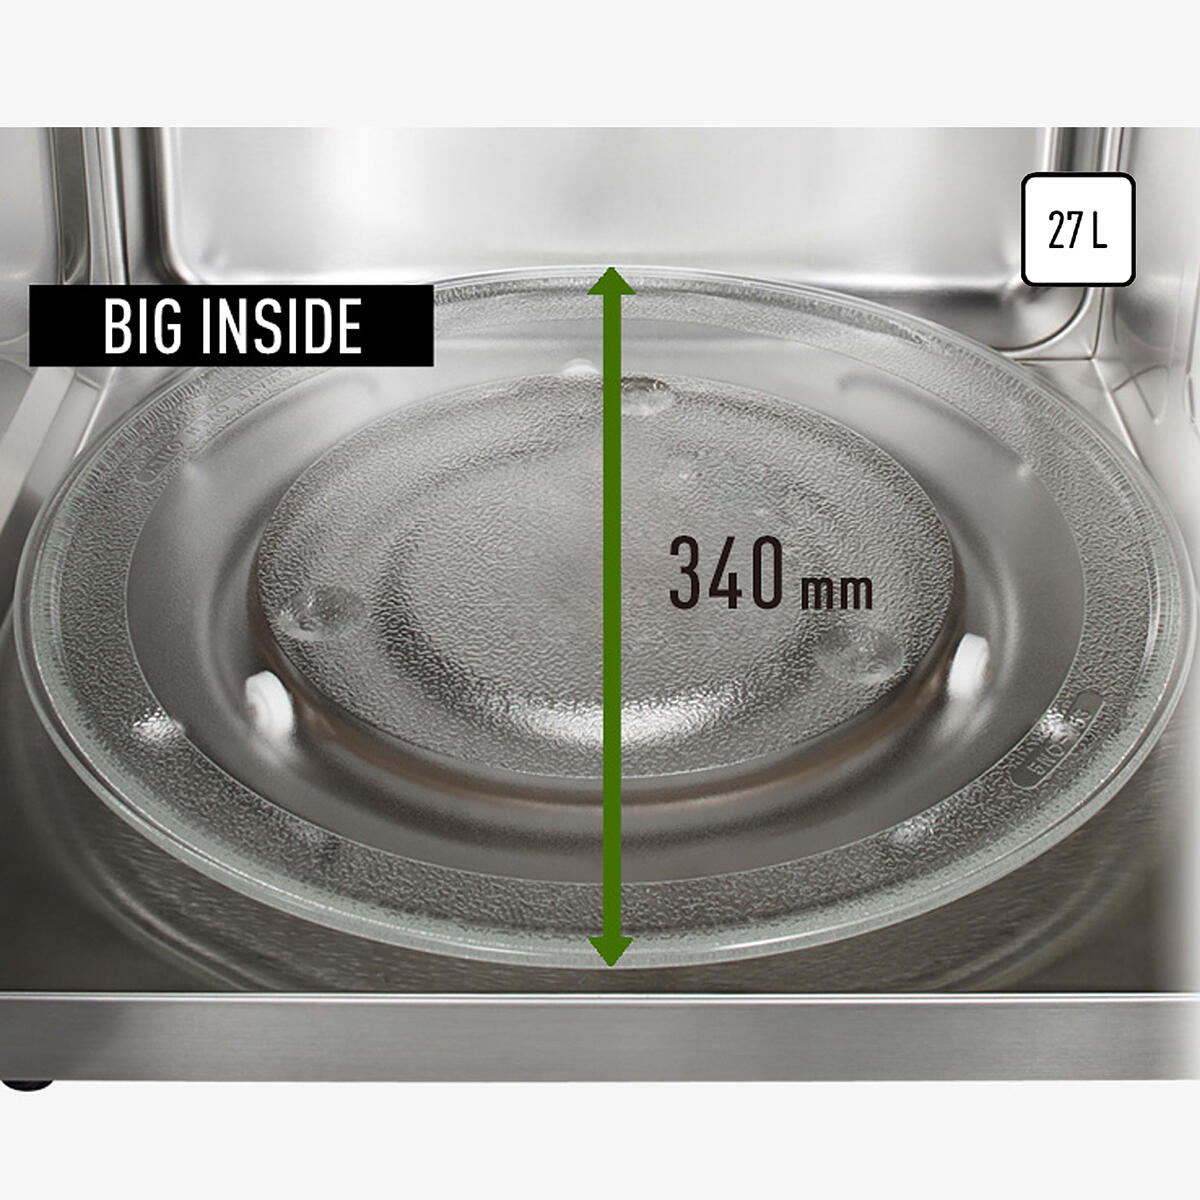 A Spacious Microwave Designed For Family-Size Cooking